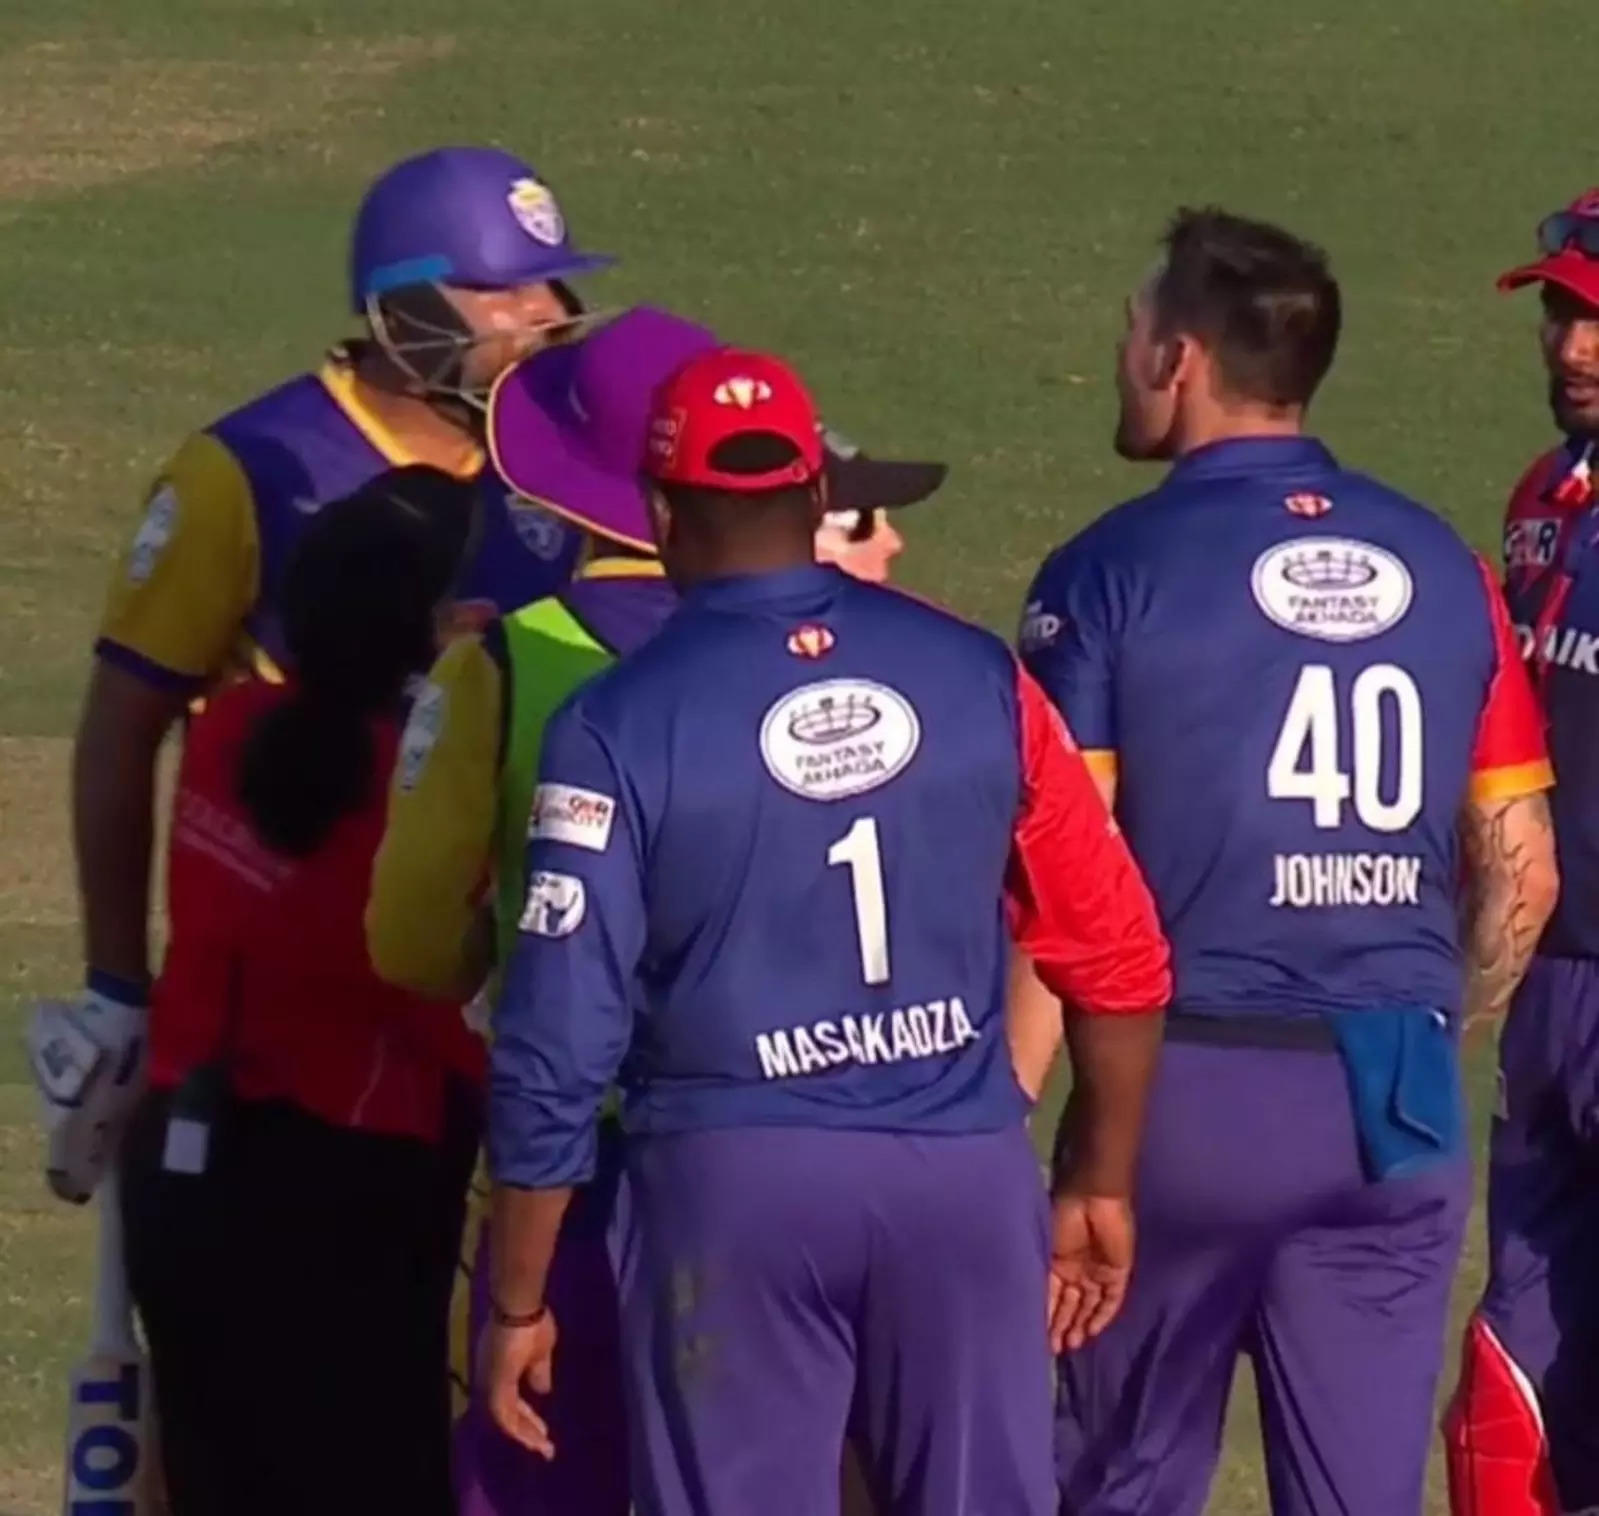 Watch: Mitchell Johnson pushes Yusuf Pathan in ugly mid-pitch spat